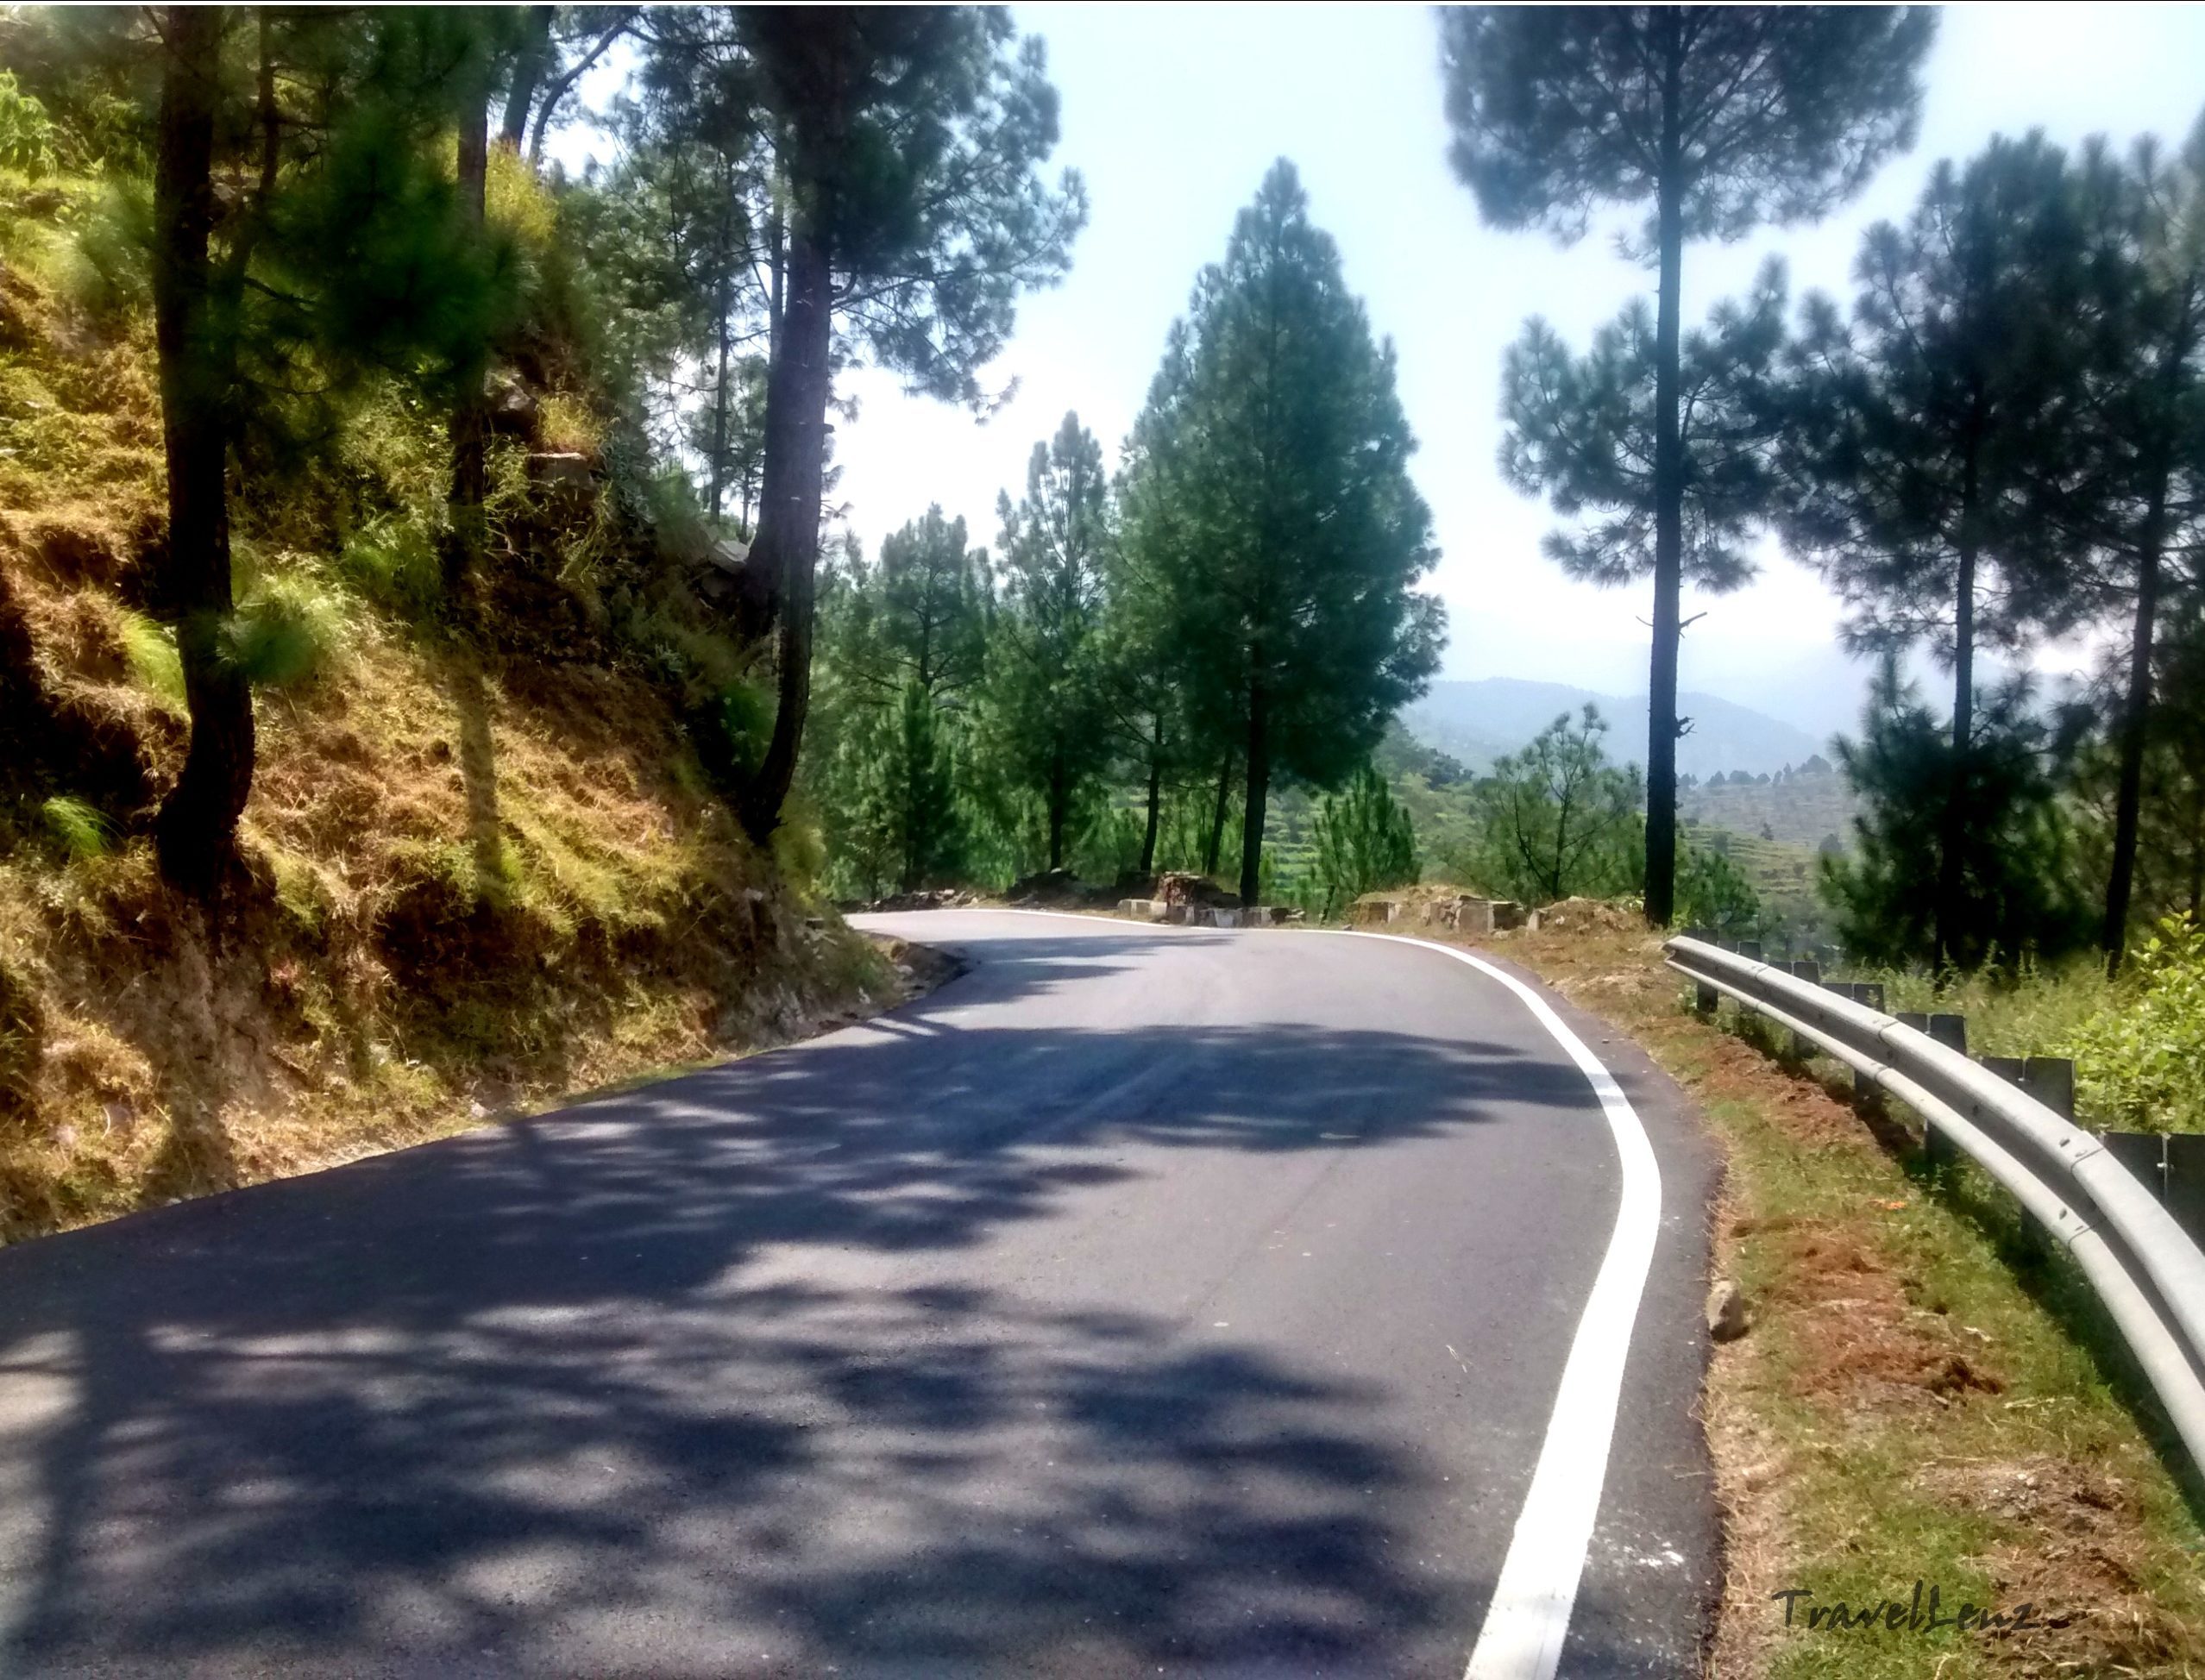 A hilly road on the way from Kathgodam to Lohajung